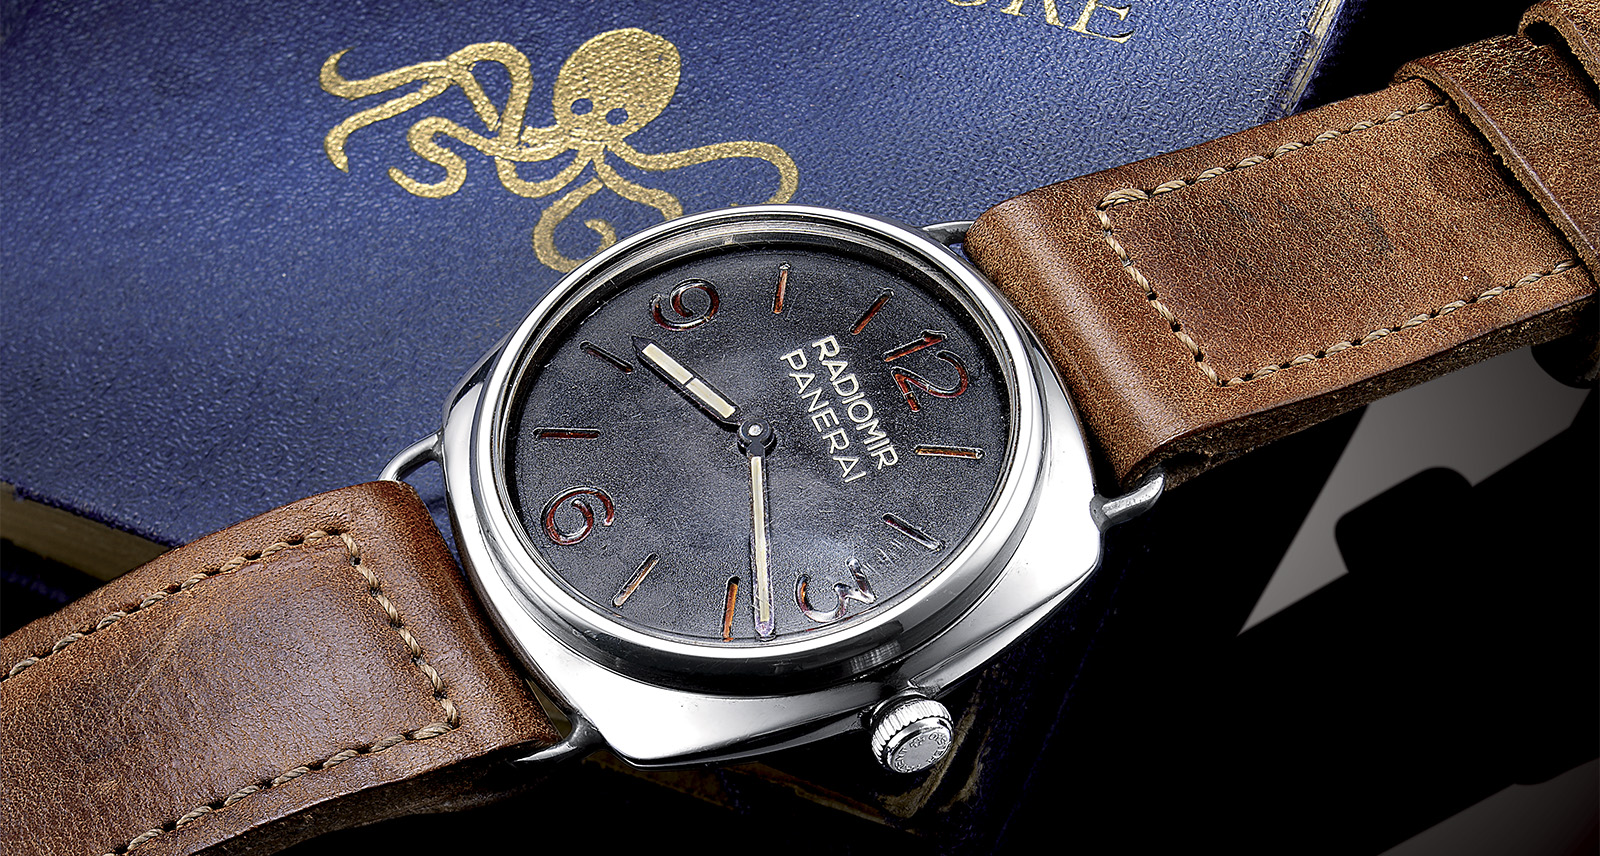 Panerai Radiomir Laid out over blue book